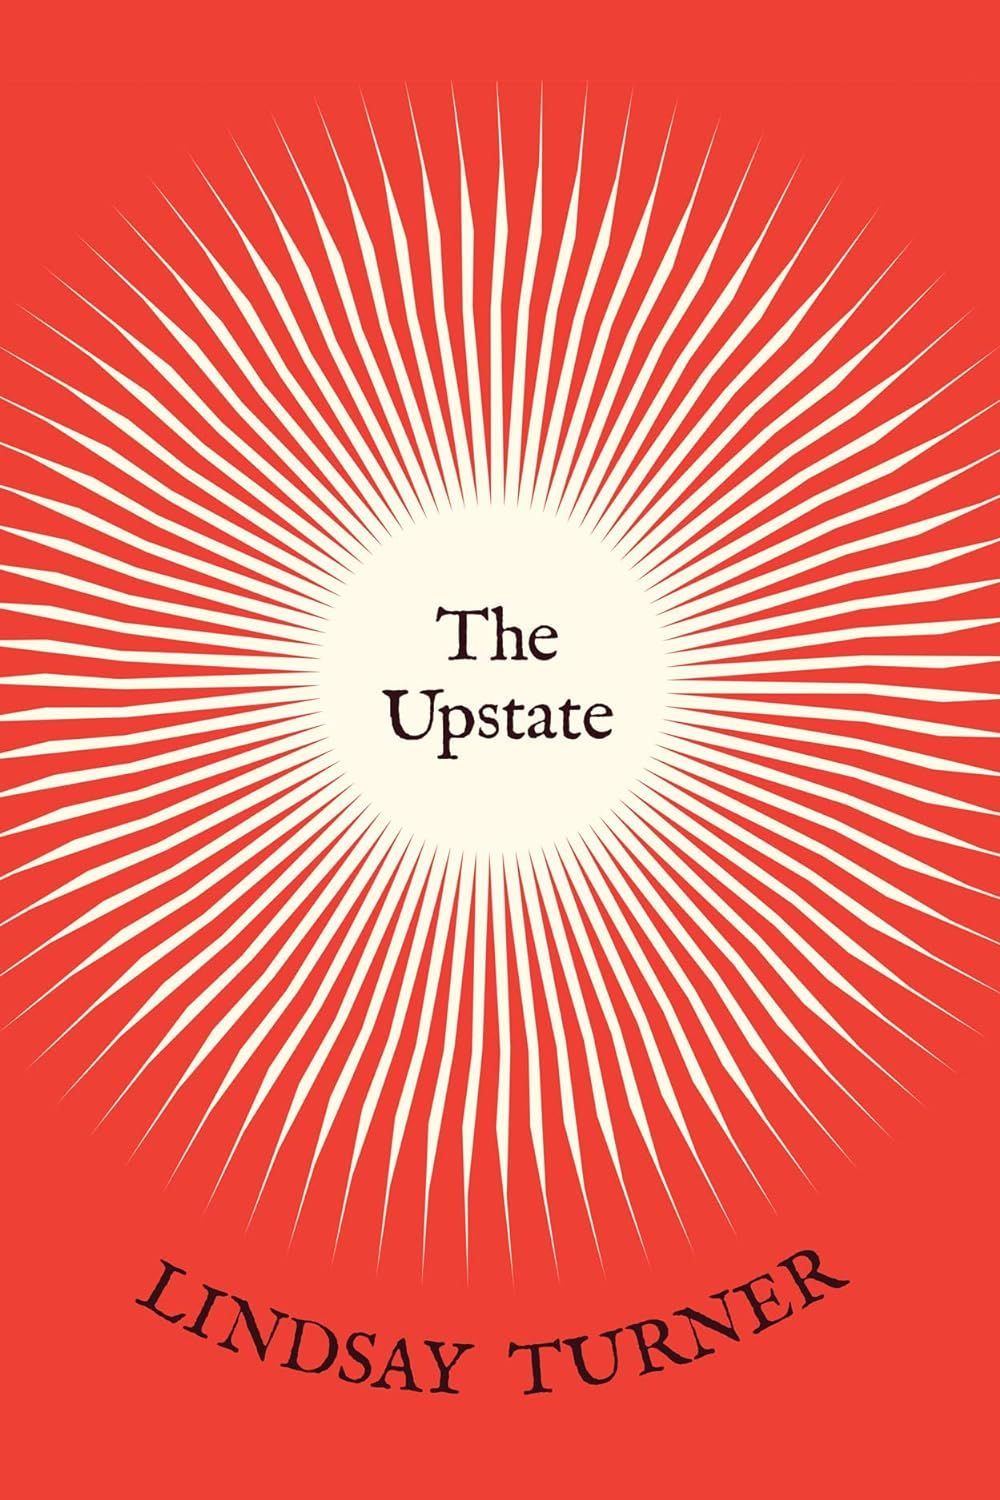 How the World Ends: On Lindsay Turner’s “The Upstate”